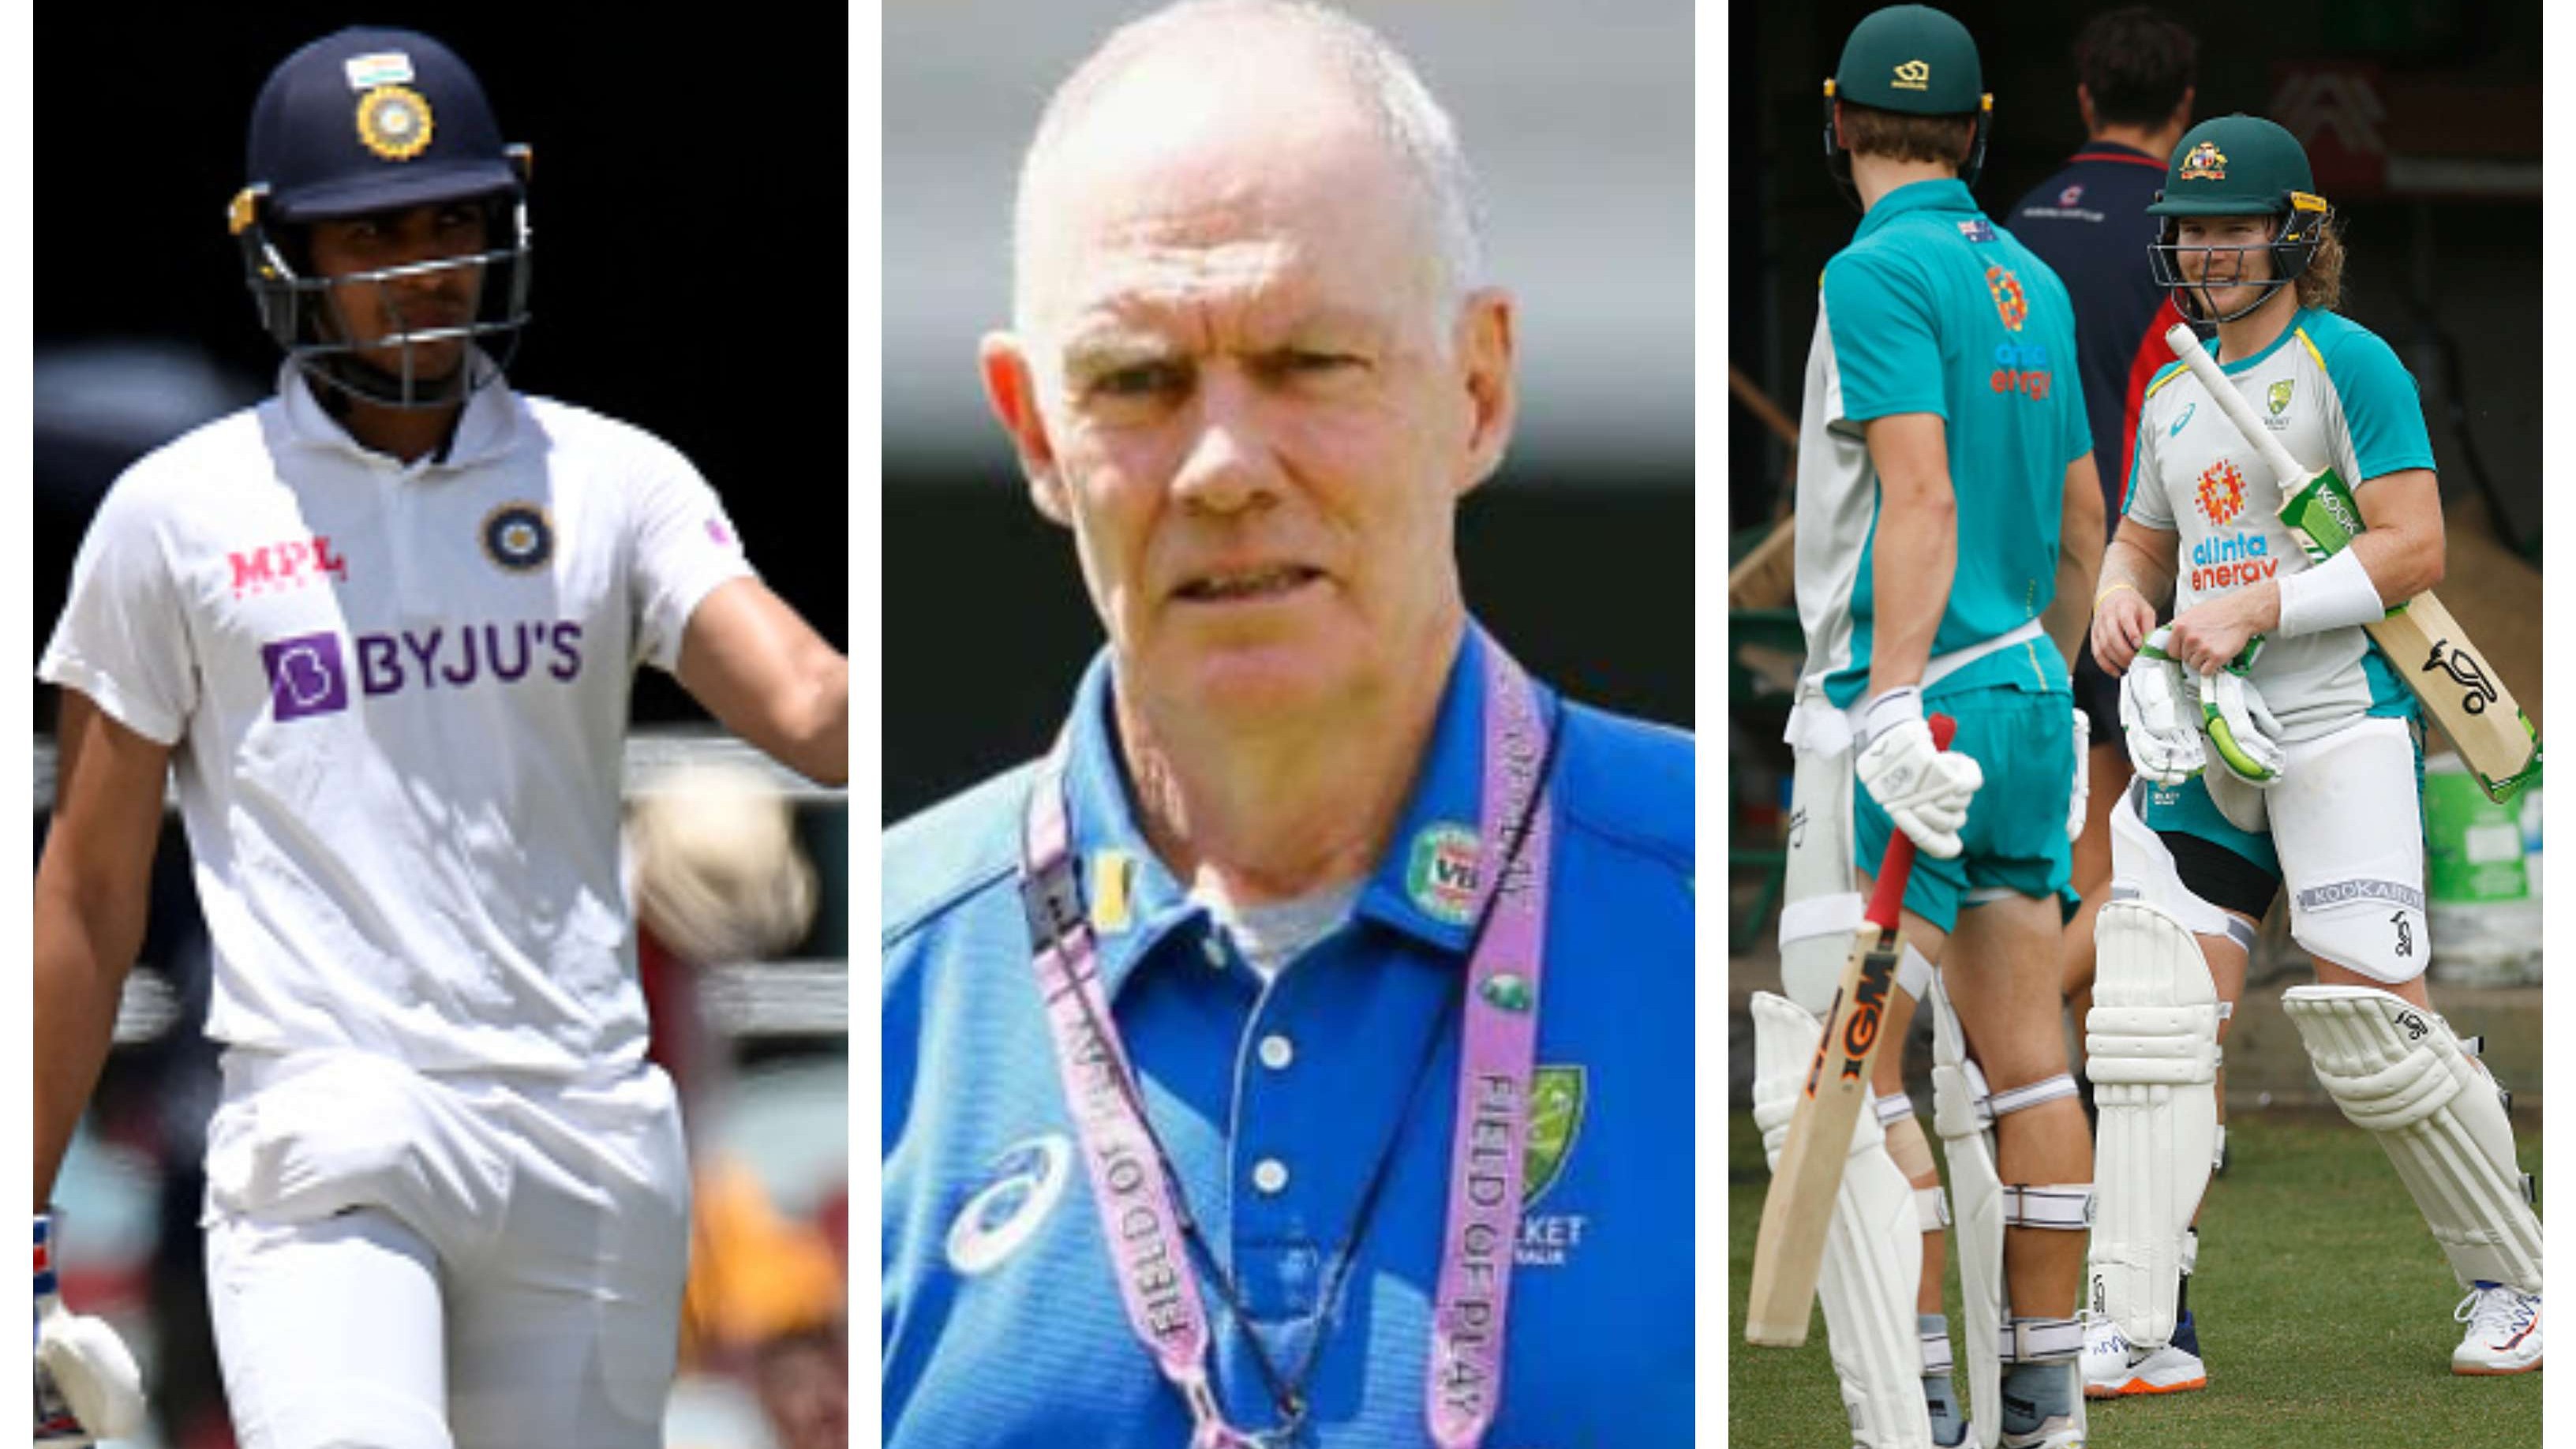 AUS v IND 2020-21: ‘Still in primary school’, Greg Chappell compares Australia’s young cricketers to Indian counterparts